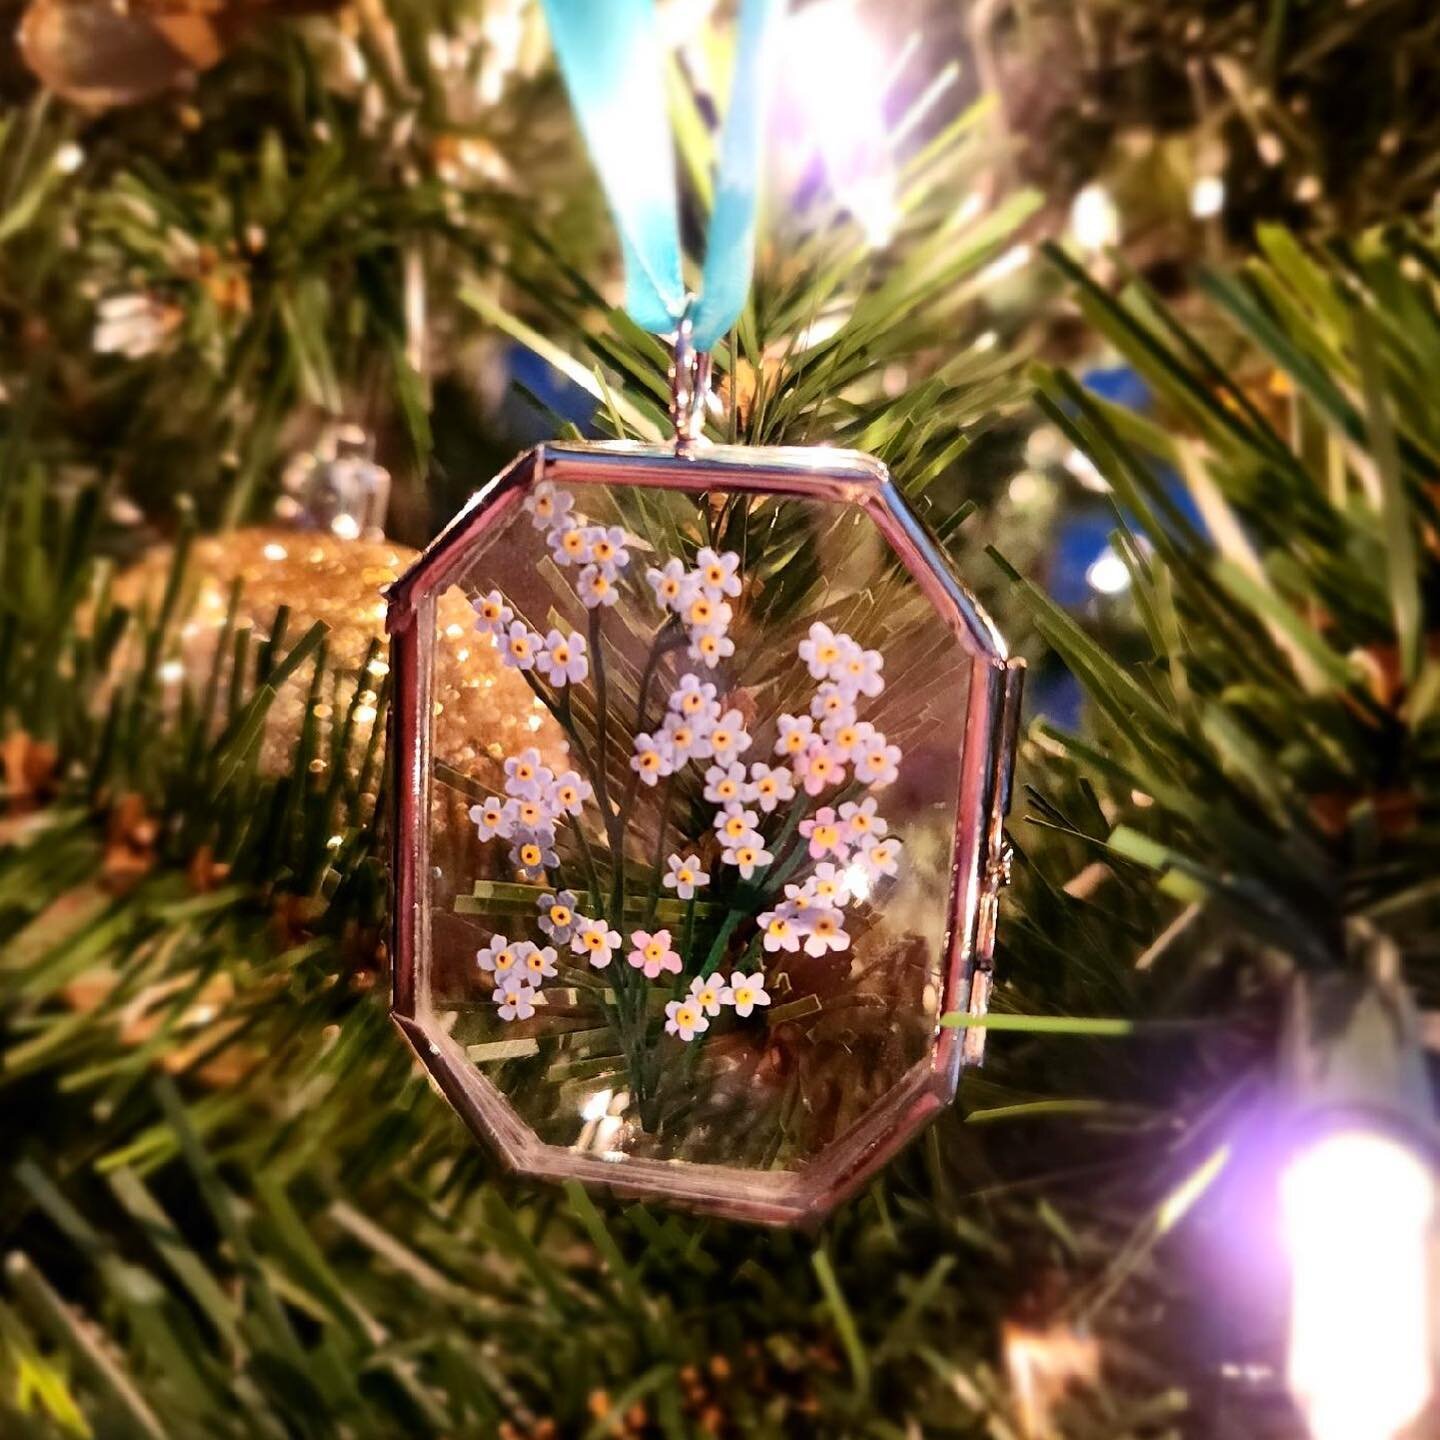 I just received this splendid photo from a special client 🥰 
Pictured is of one of my Christmas ornaments (containing cut paper flowers inside) hanging on her beautiful tree!!! So fun to see these pieces in their new homes 🎄🌹
.
.
.
.
.
.

#zoelinn